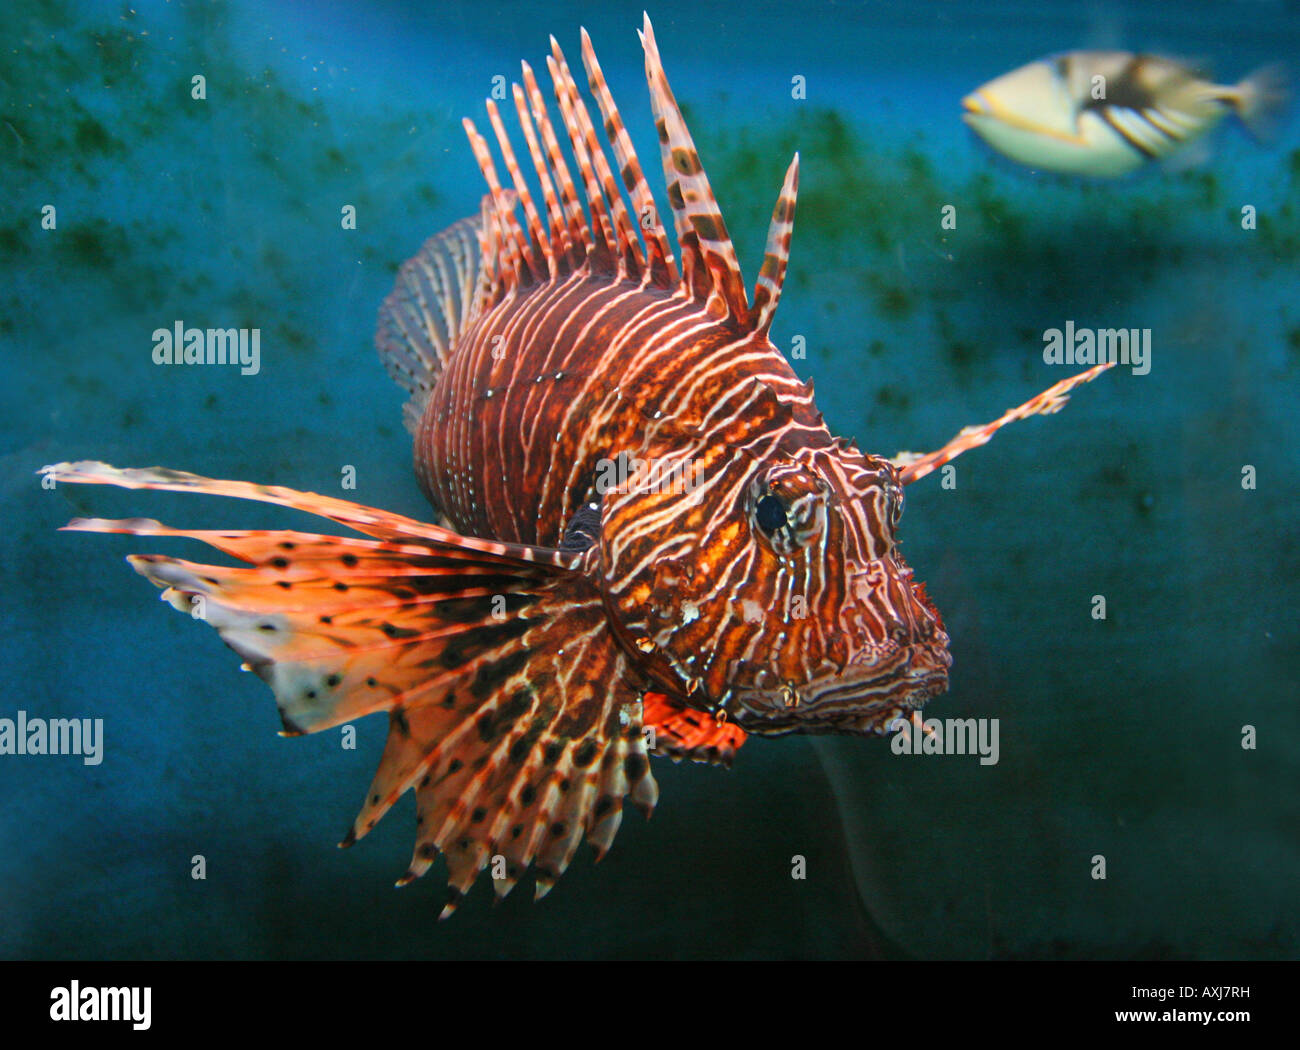 Giant Red lion fish dangerous and poisonous Stock Photo